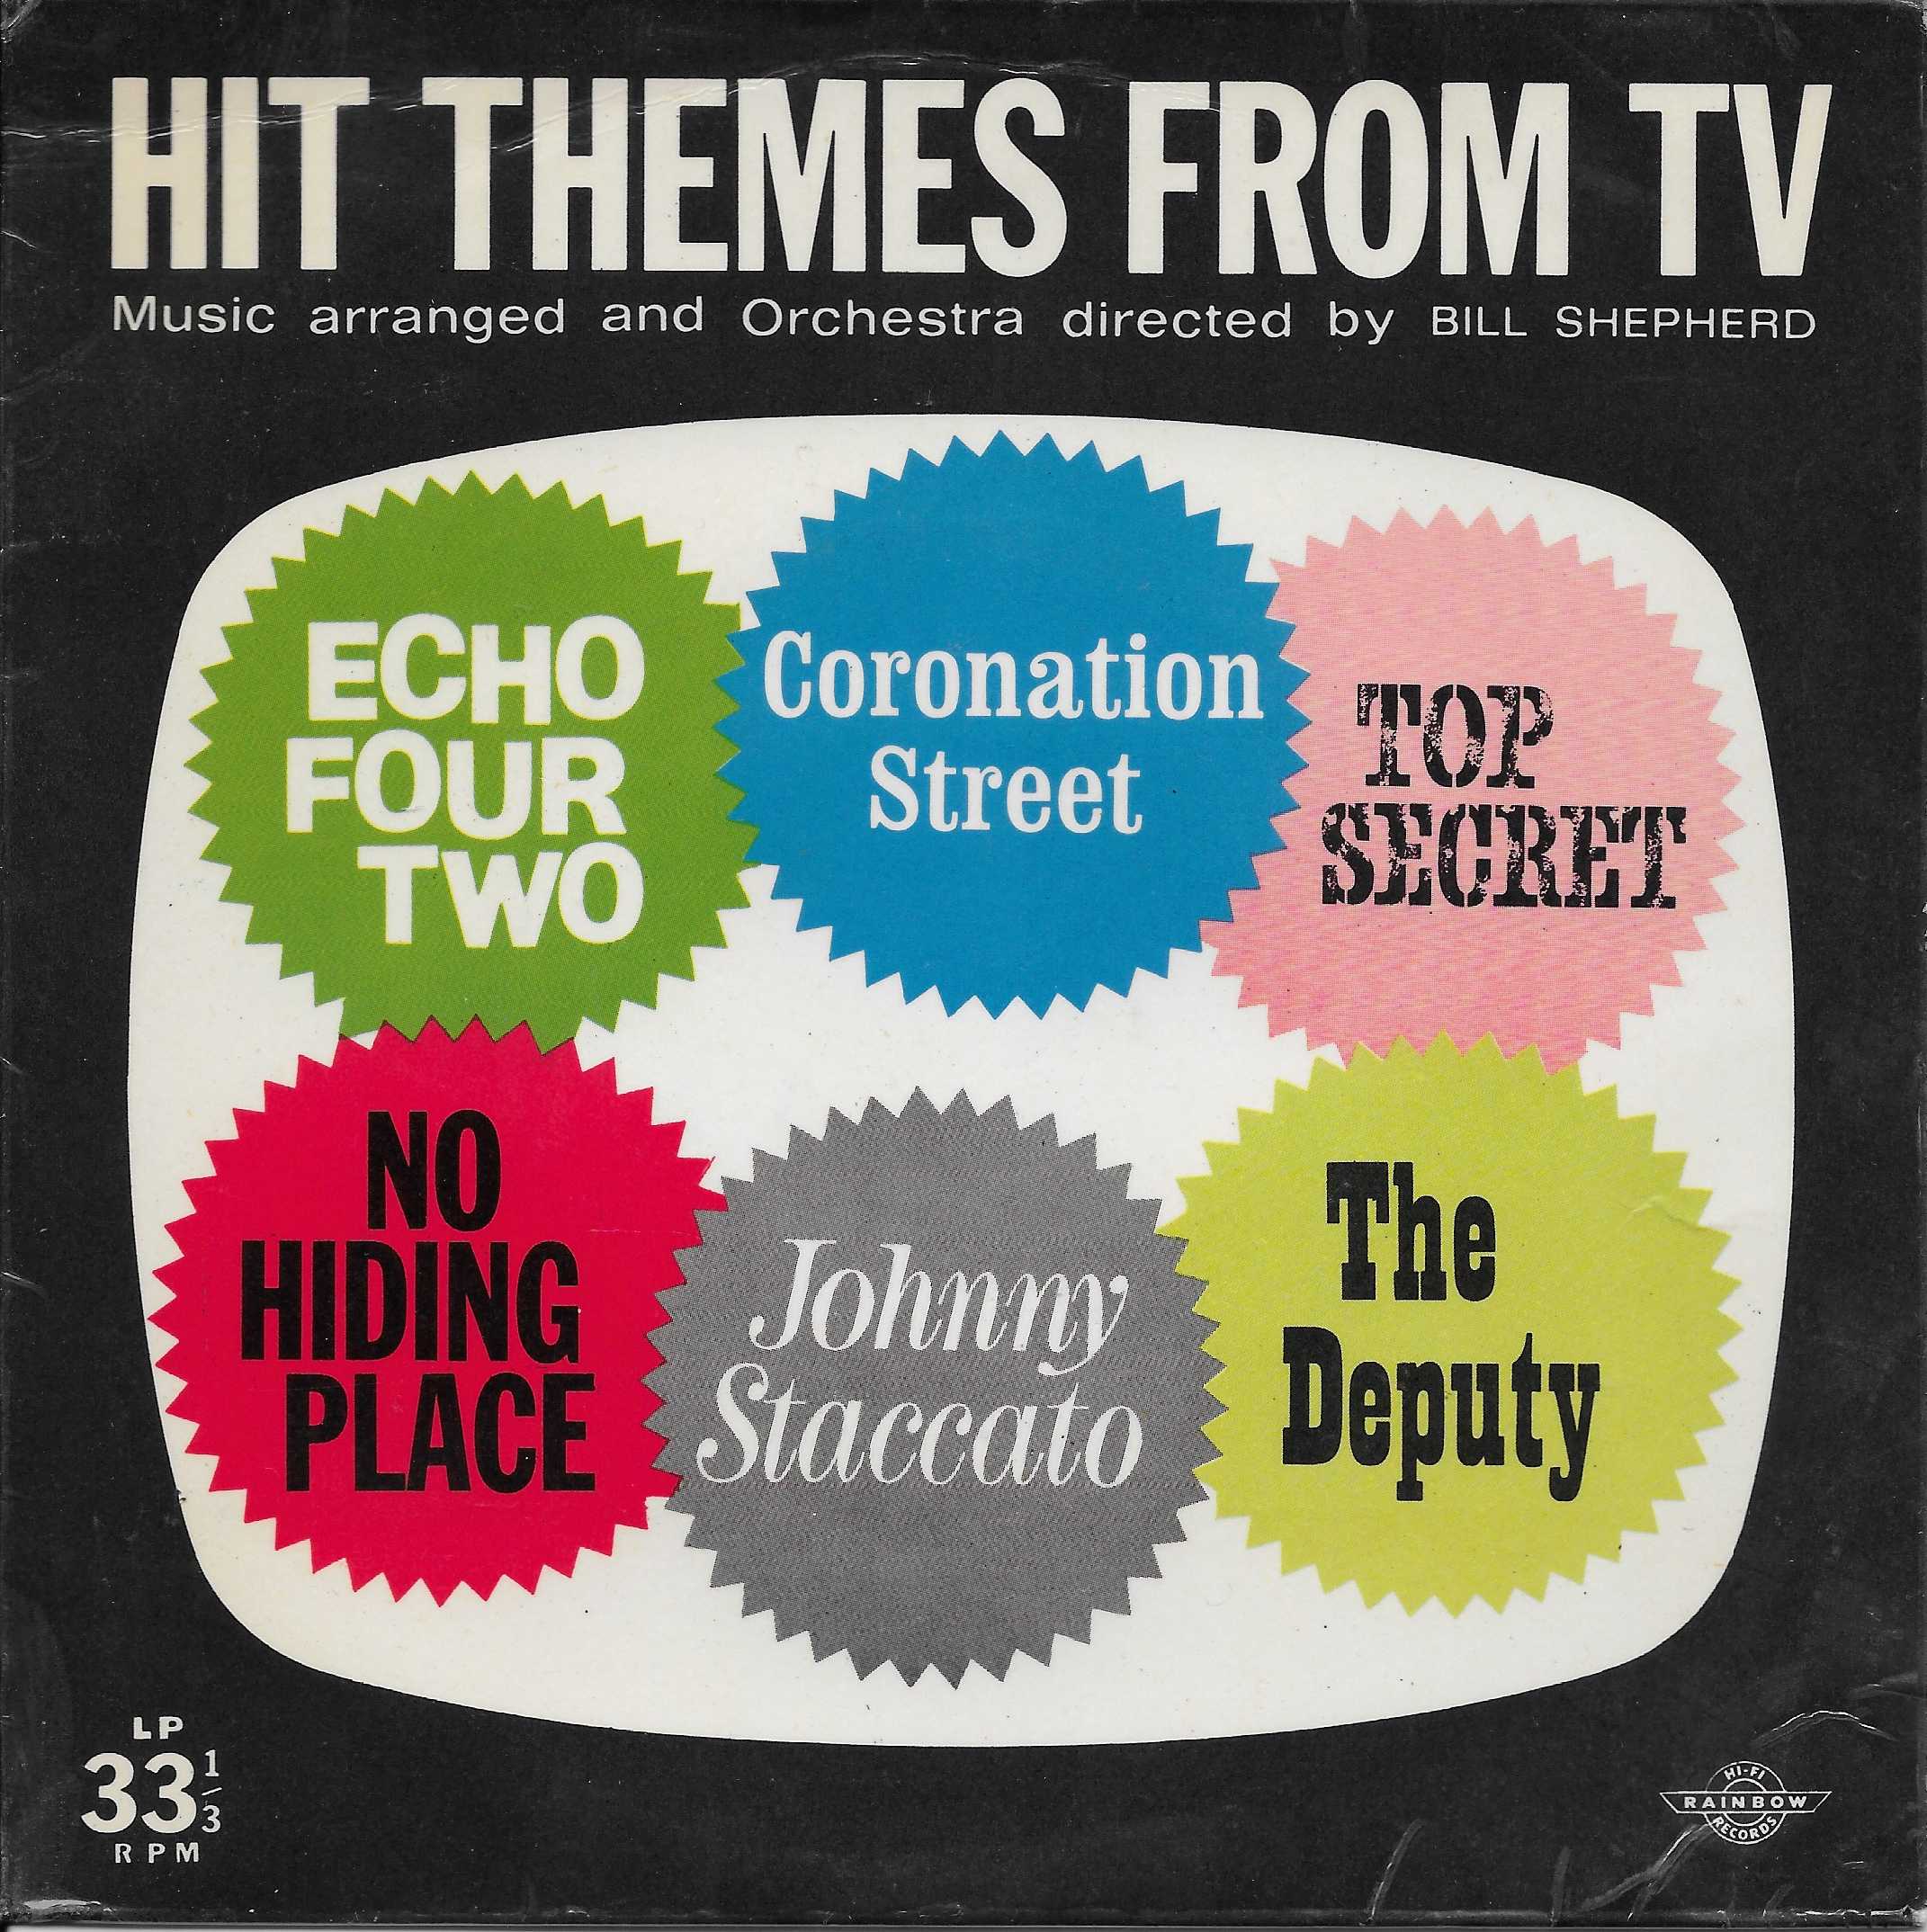 Picture of RS - I - IU Hit themes from TV by artist Various from ITV, Channel 4 and Channel 5 library